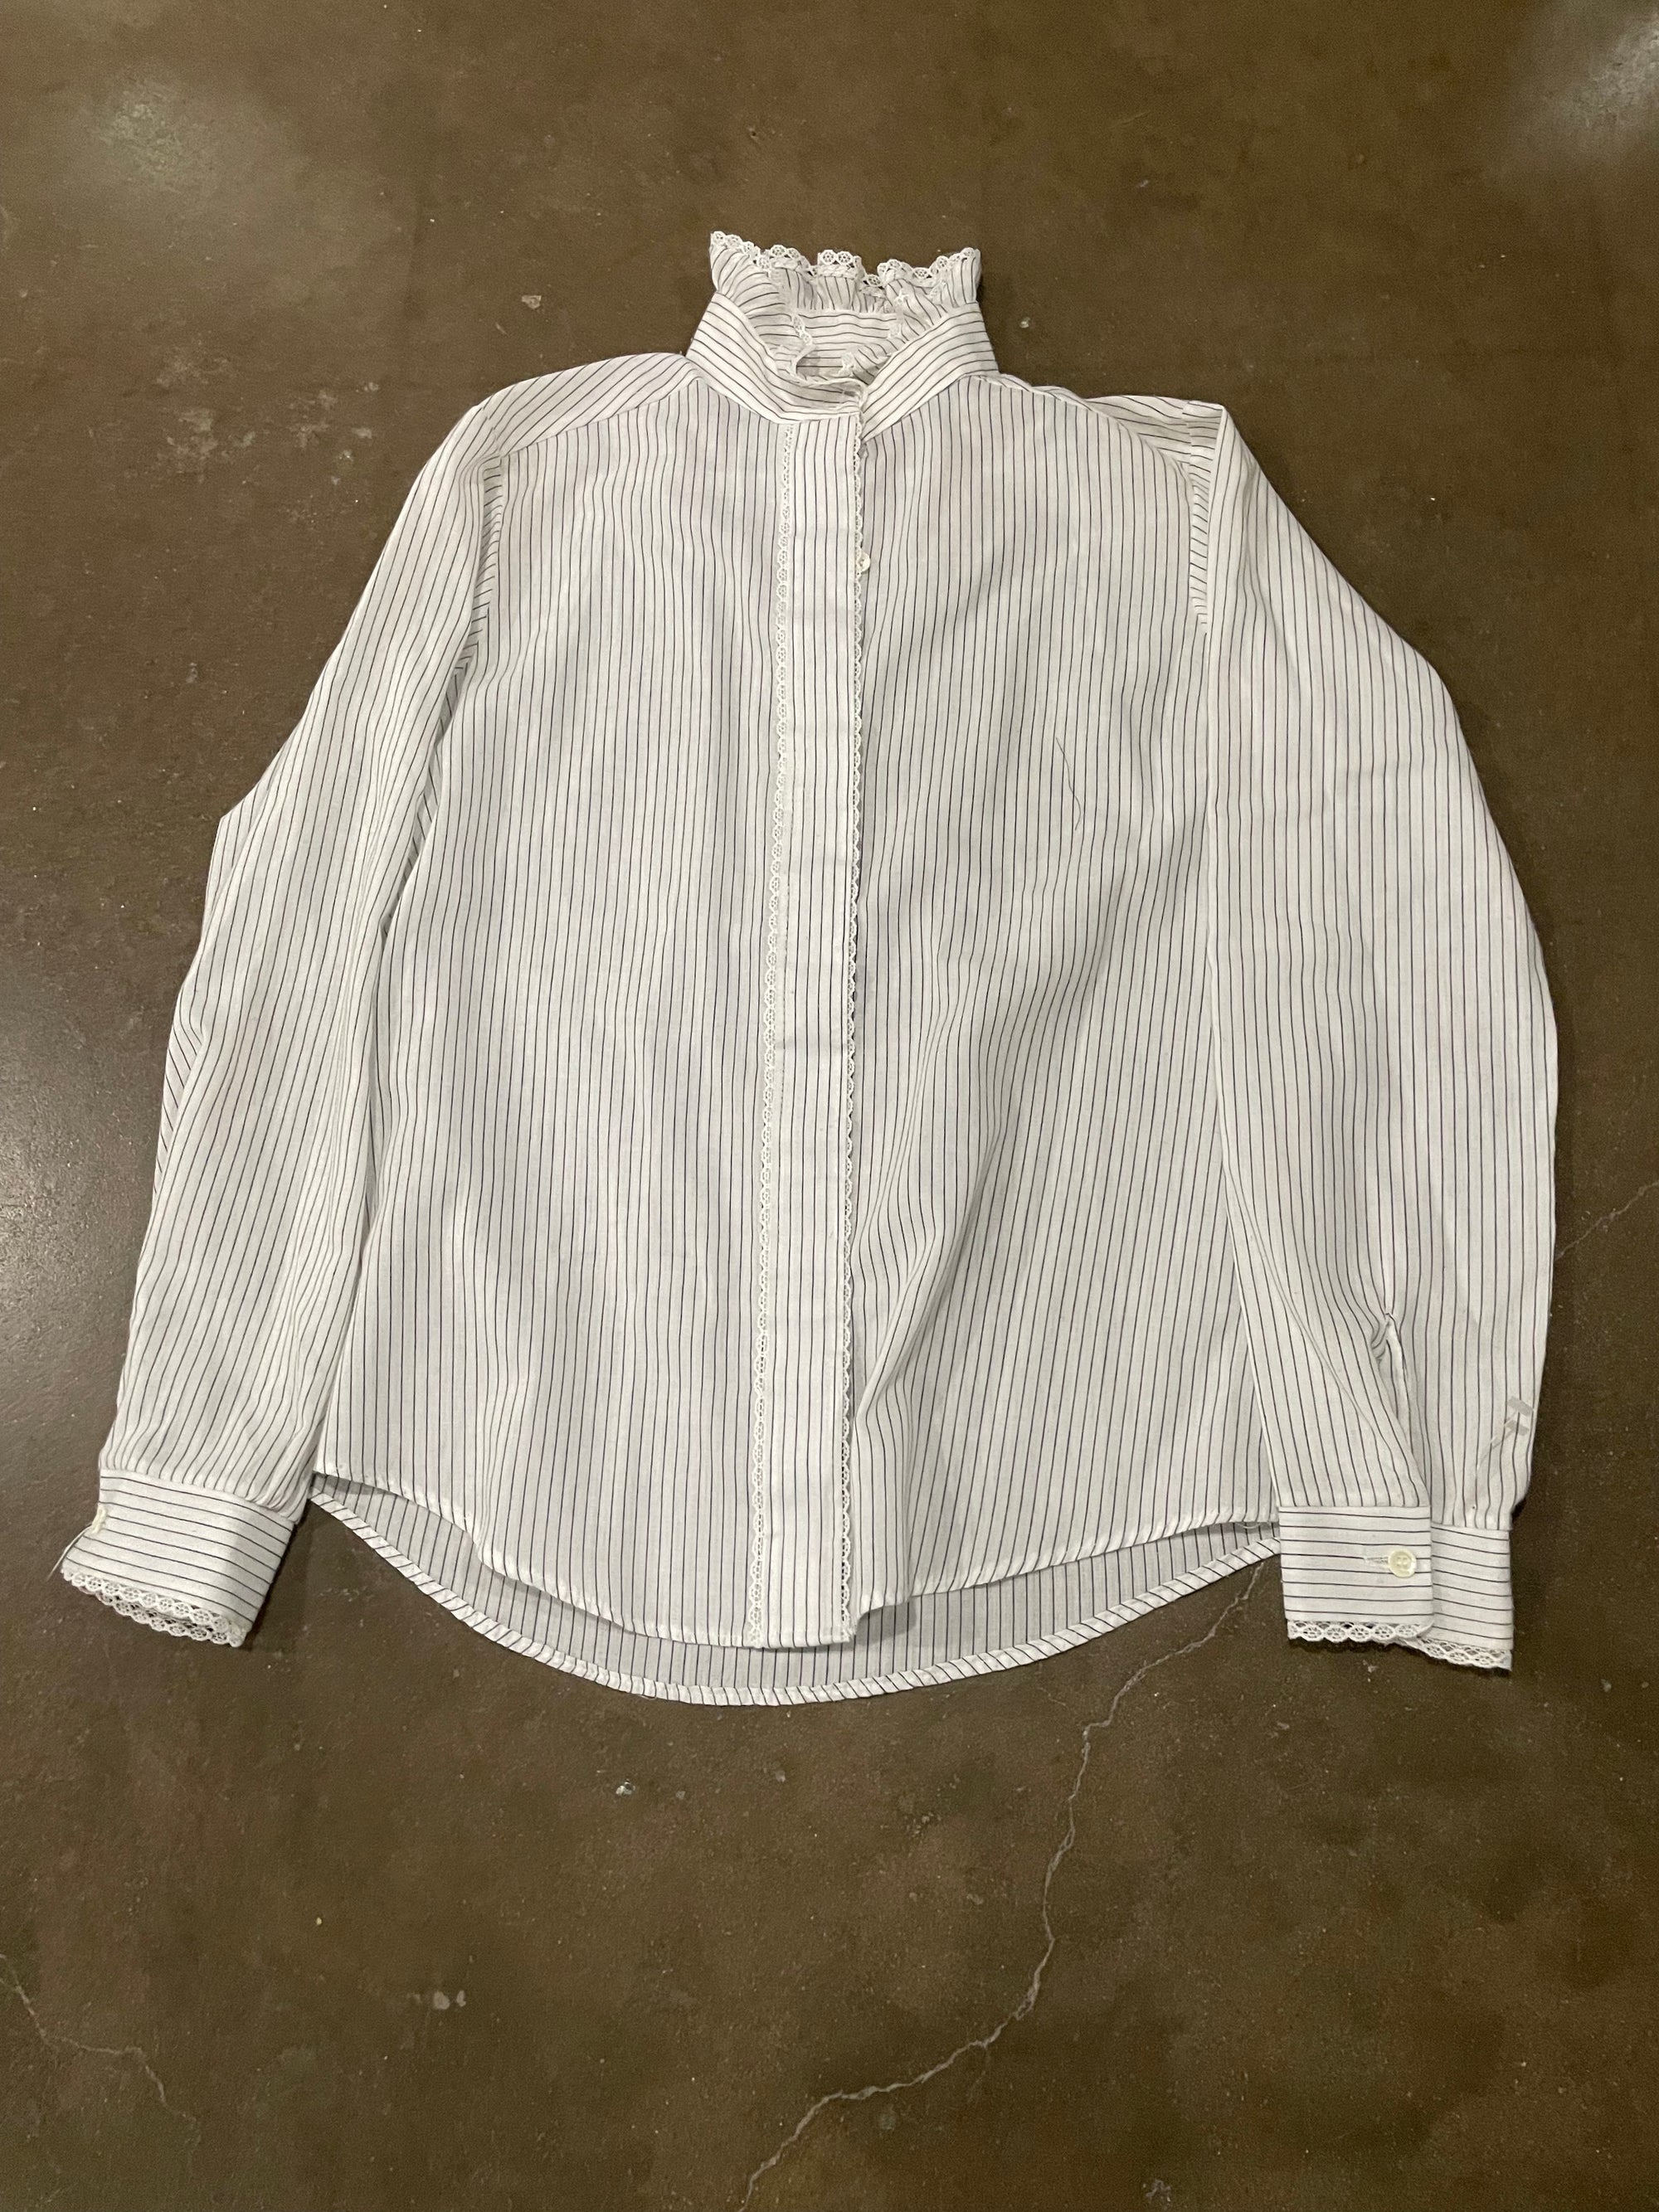 Shapely Women's Button Down